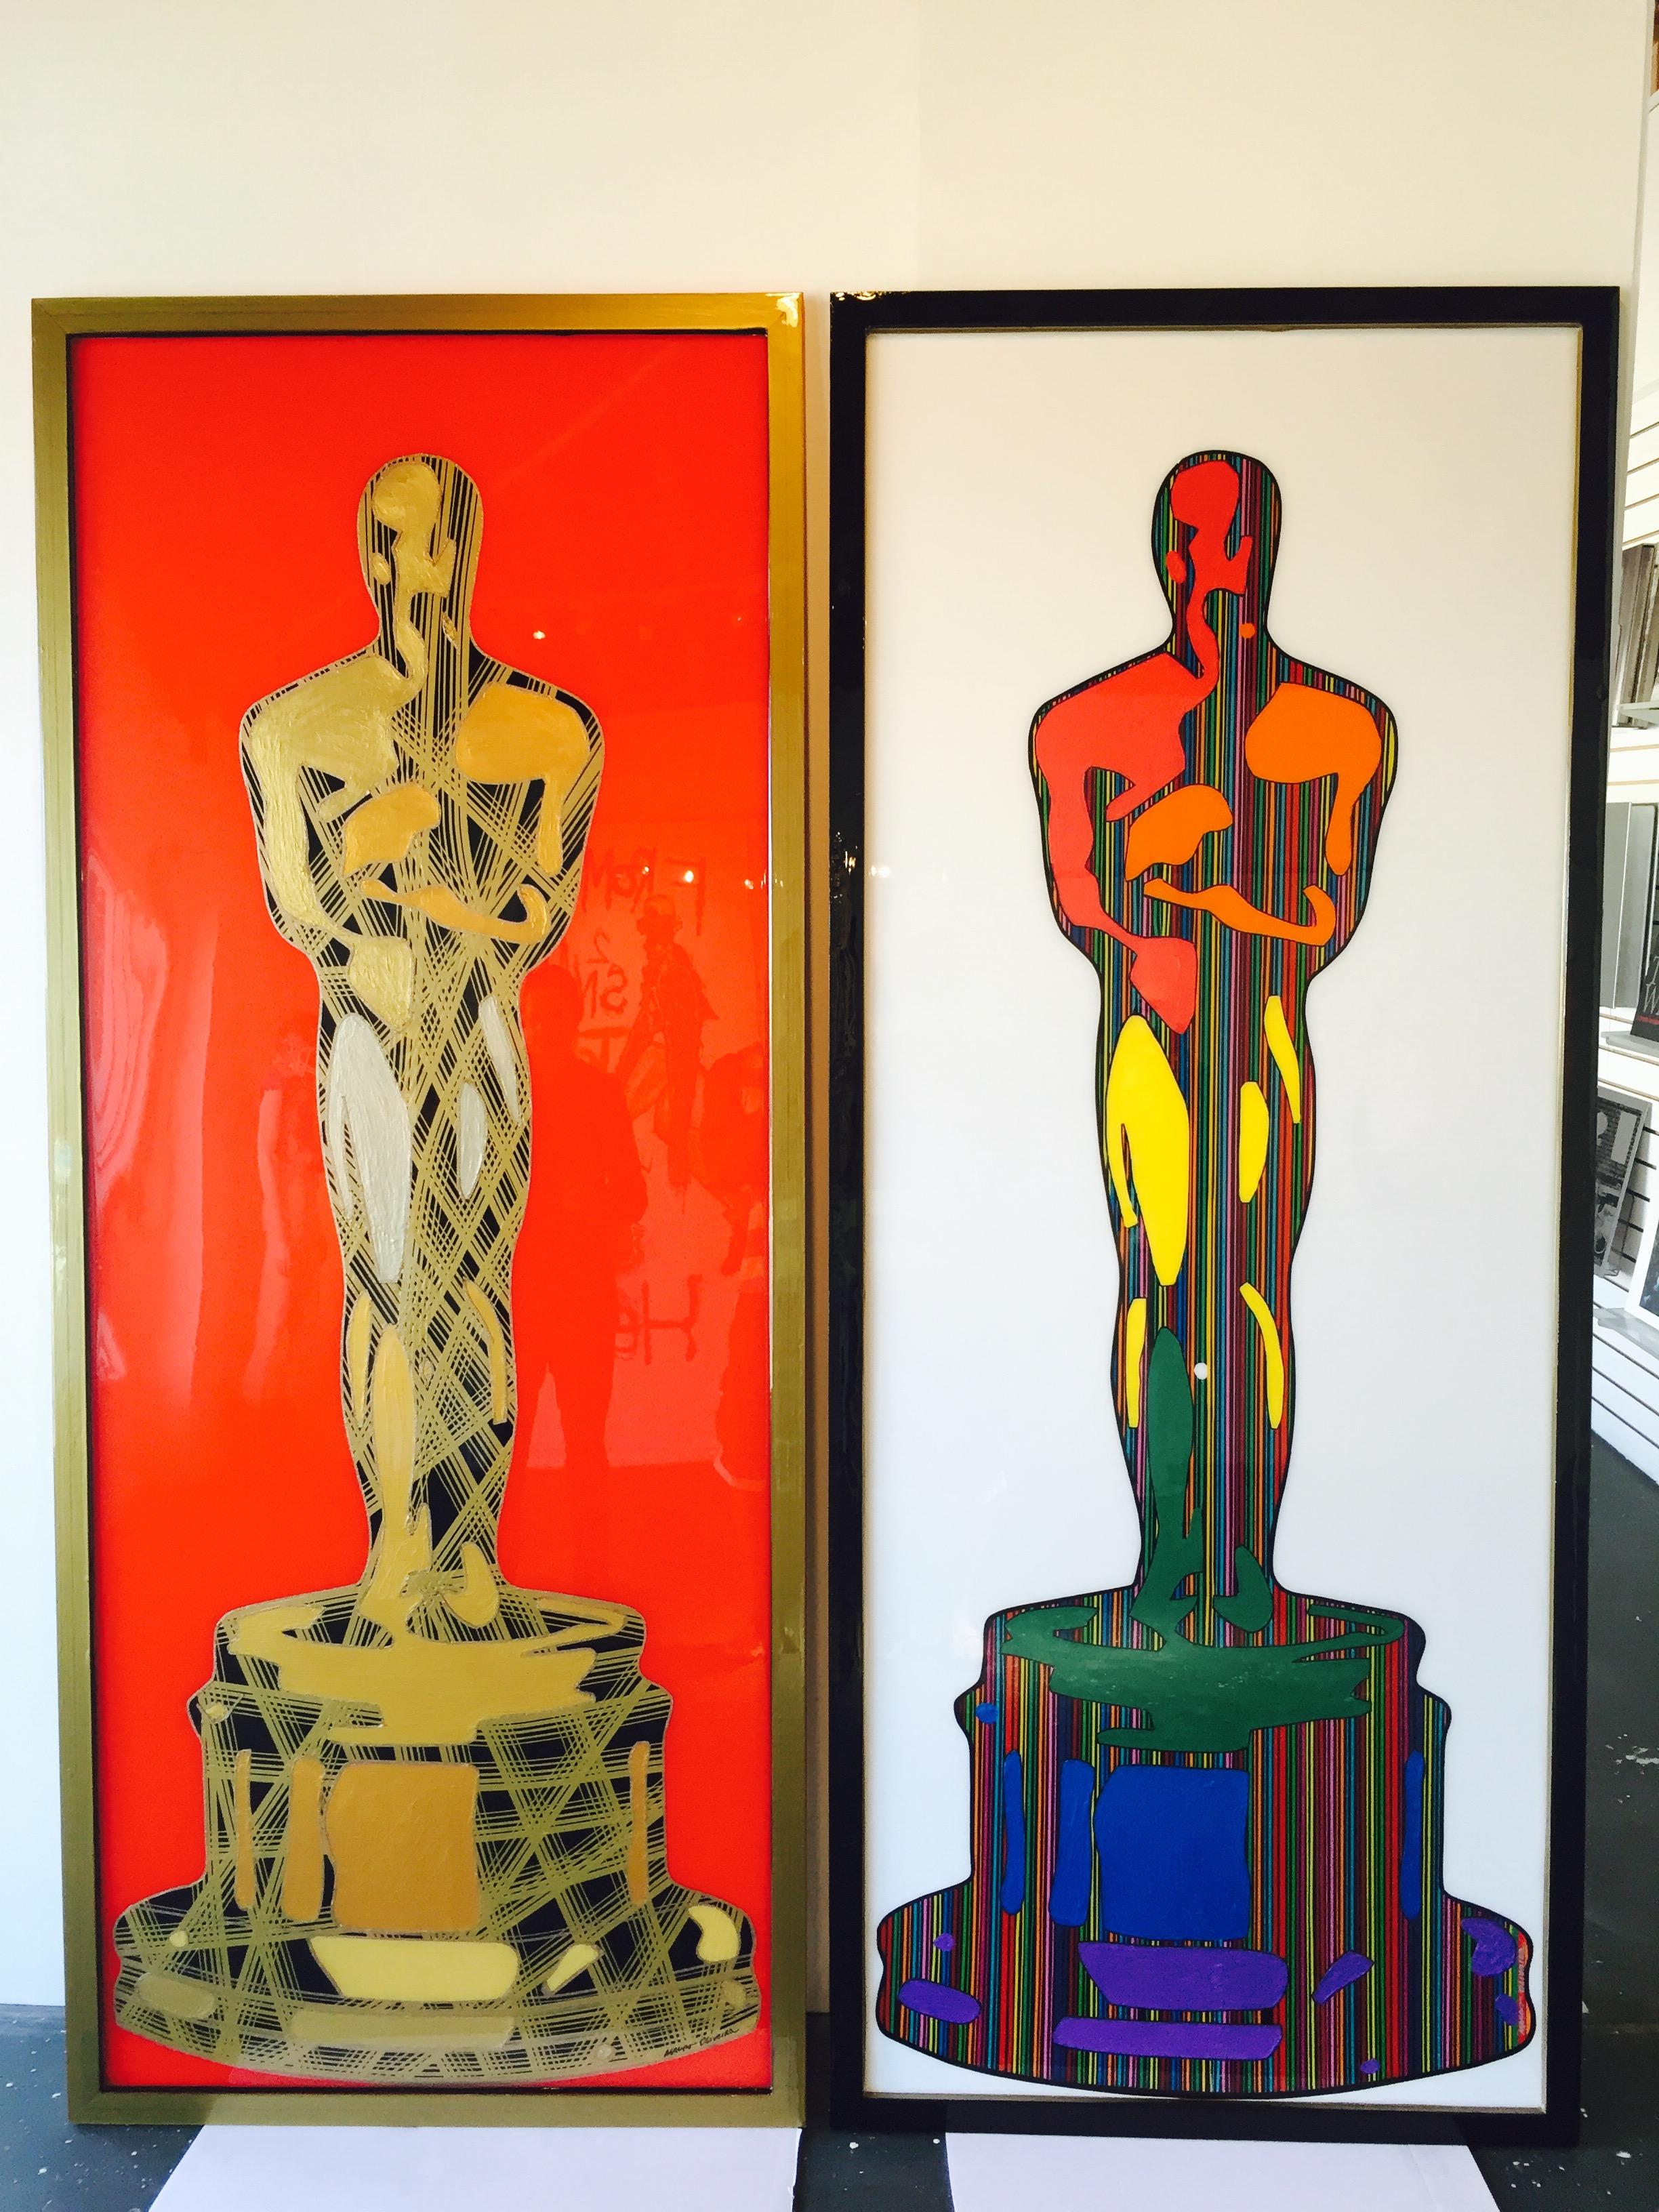 Celebrating the Academy with this Limited Oscar Art Series by Mauro Oliveira. 

Limited edition of 30 museum quality Giclee prints on CANVAS, signed and numbered by the artist. Print lead time 1 week. 

A 